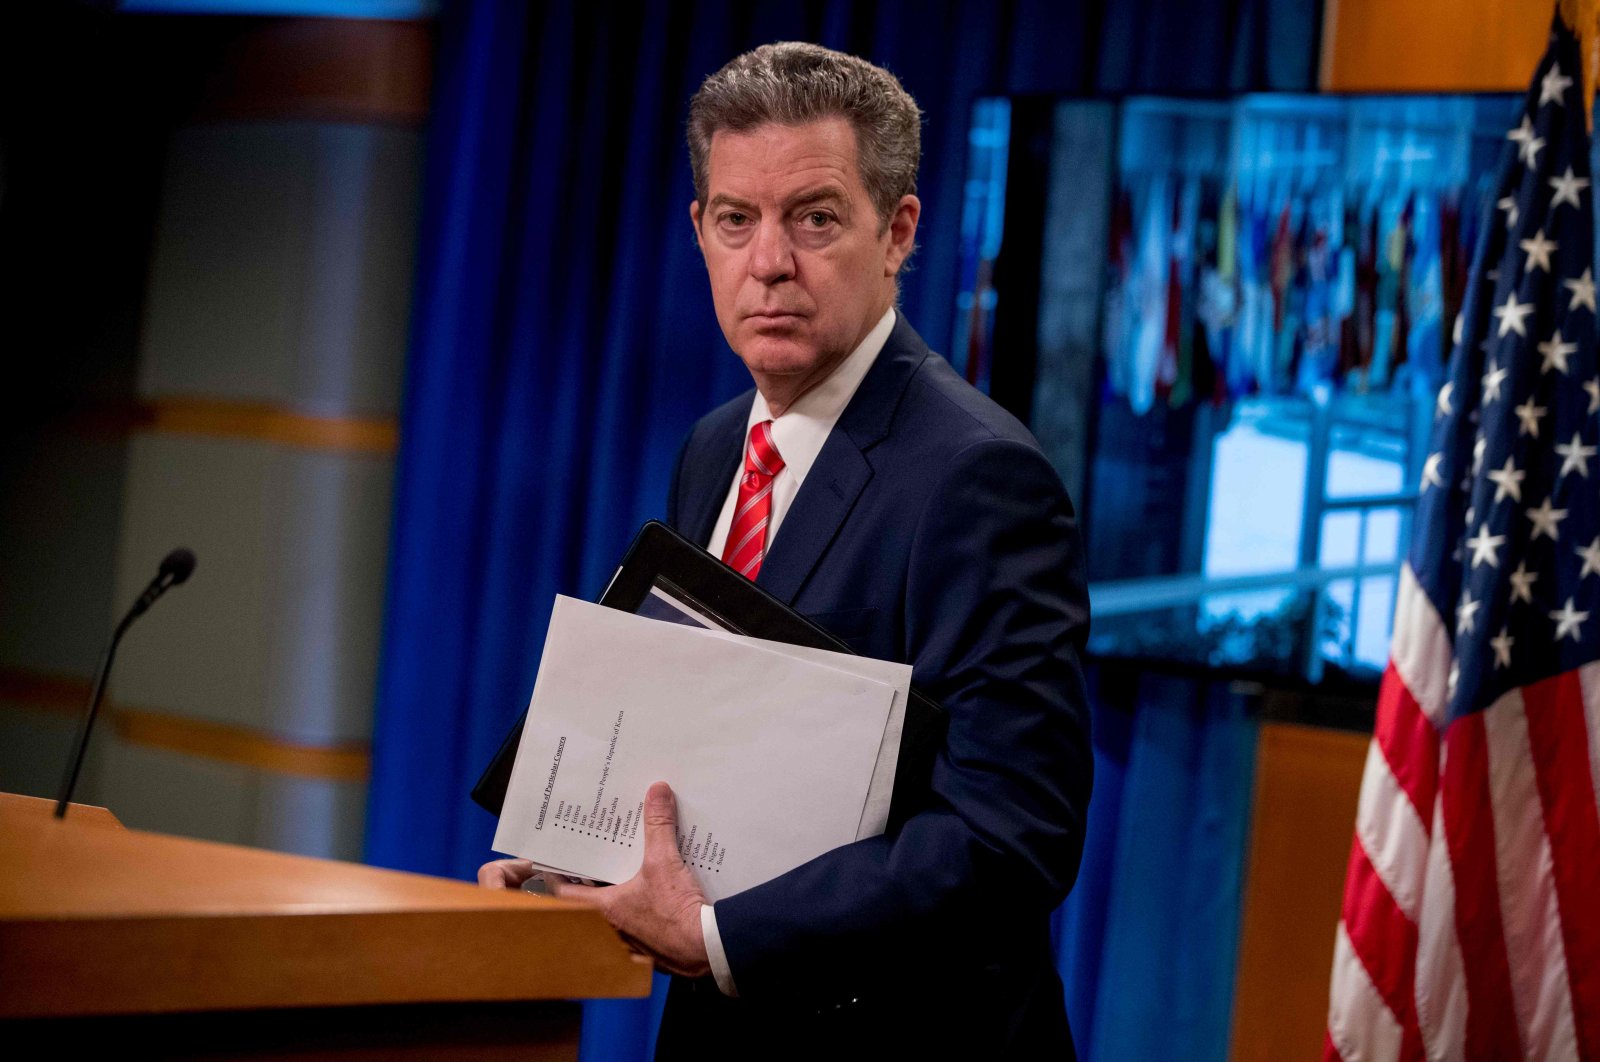 Ambassador at Large for International Religious Freedom, Sam Brownback, departs after speaking during a news conference at the State Department in Washington, D.C., June 10, 2020. (AFP Photo)